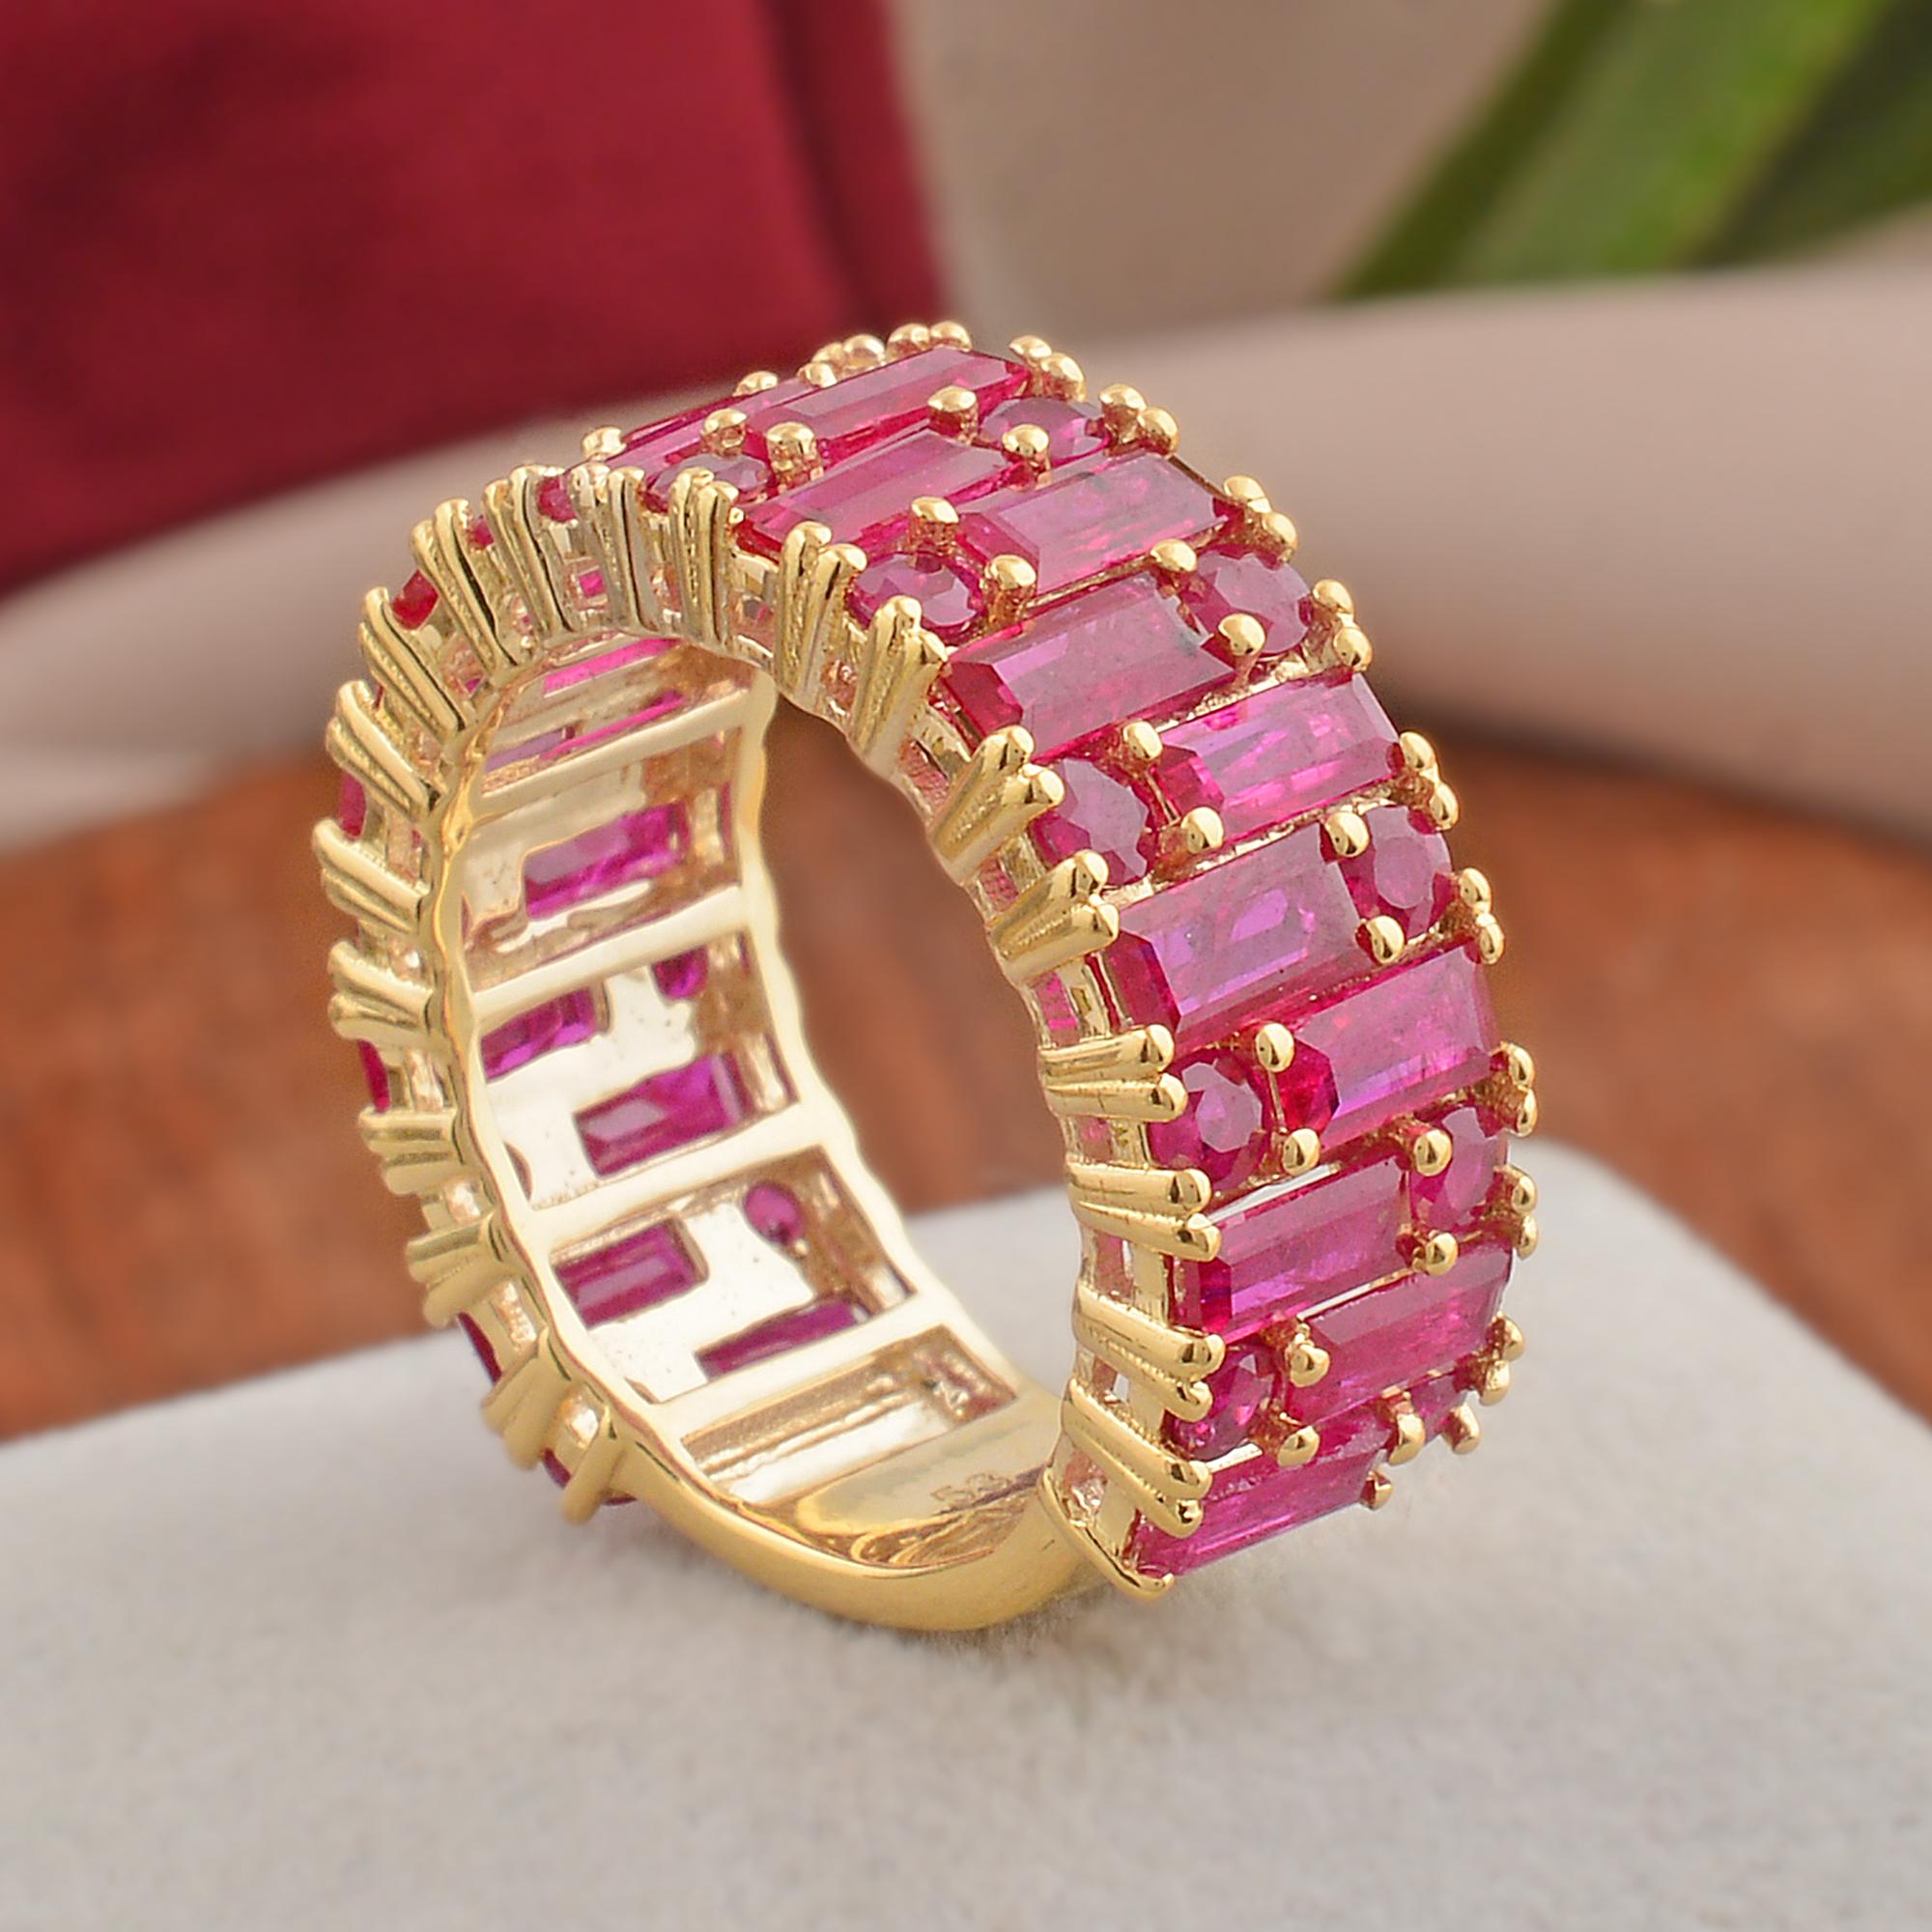 Modern 5.76 Carat Ruby Gemstone Band Ring Solid 14k Yellow Gold Handmade Fine Jewelry For Sale